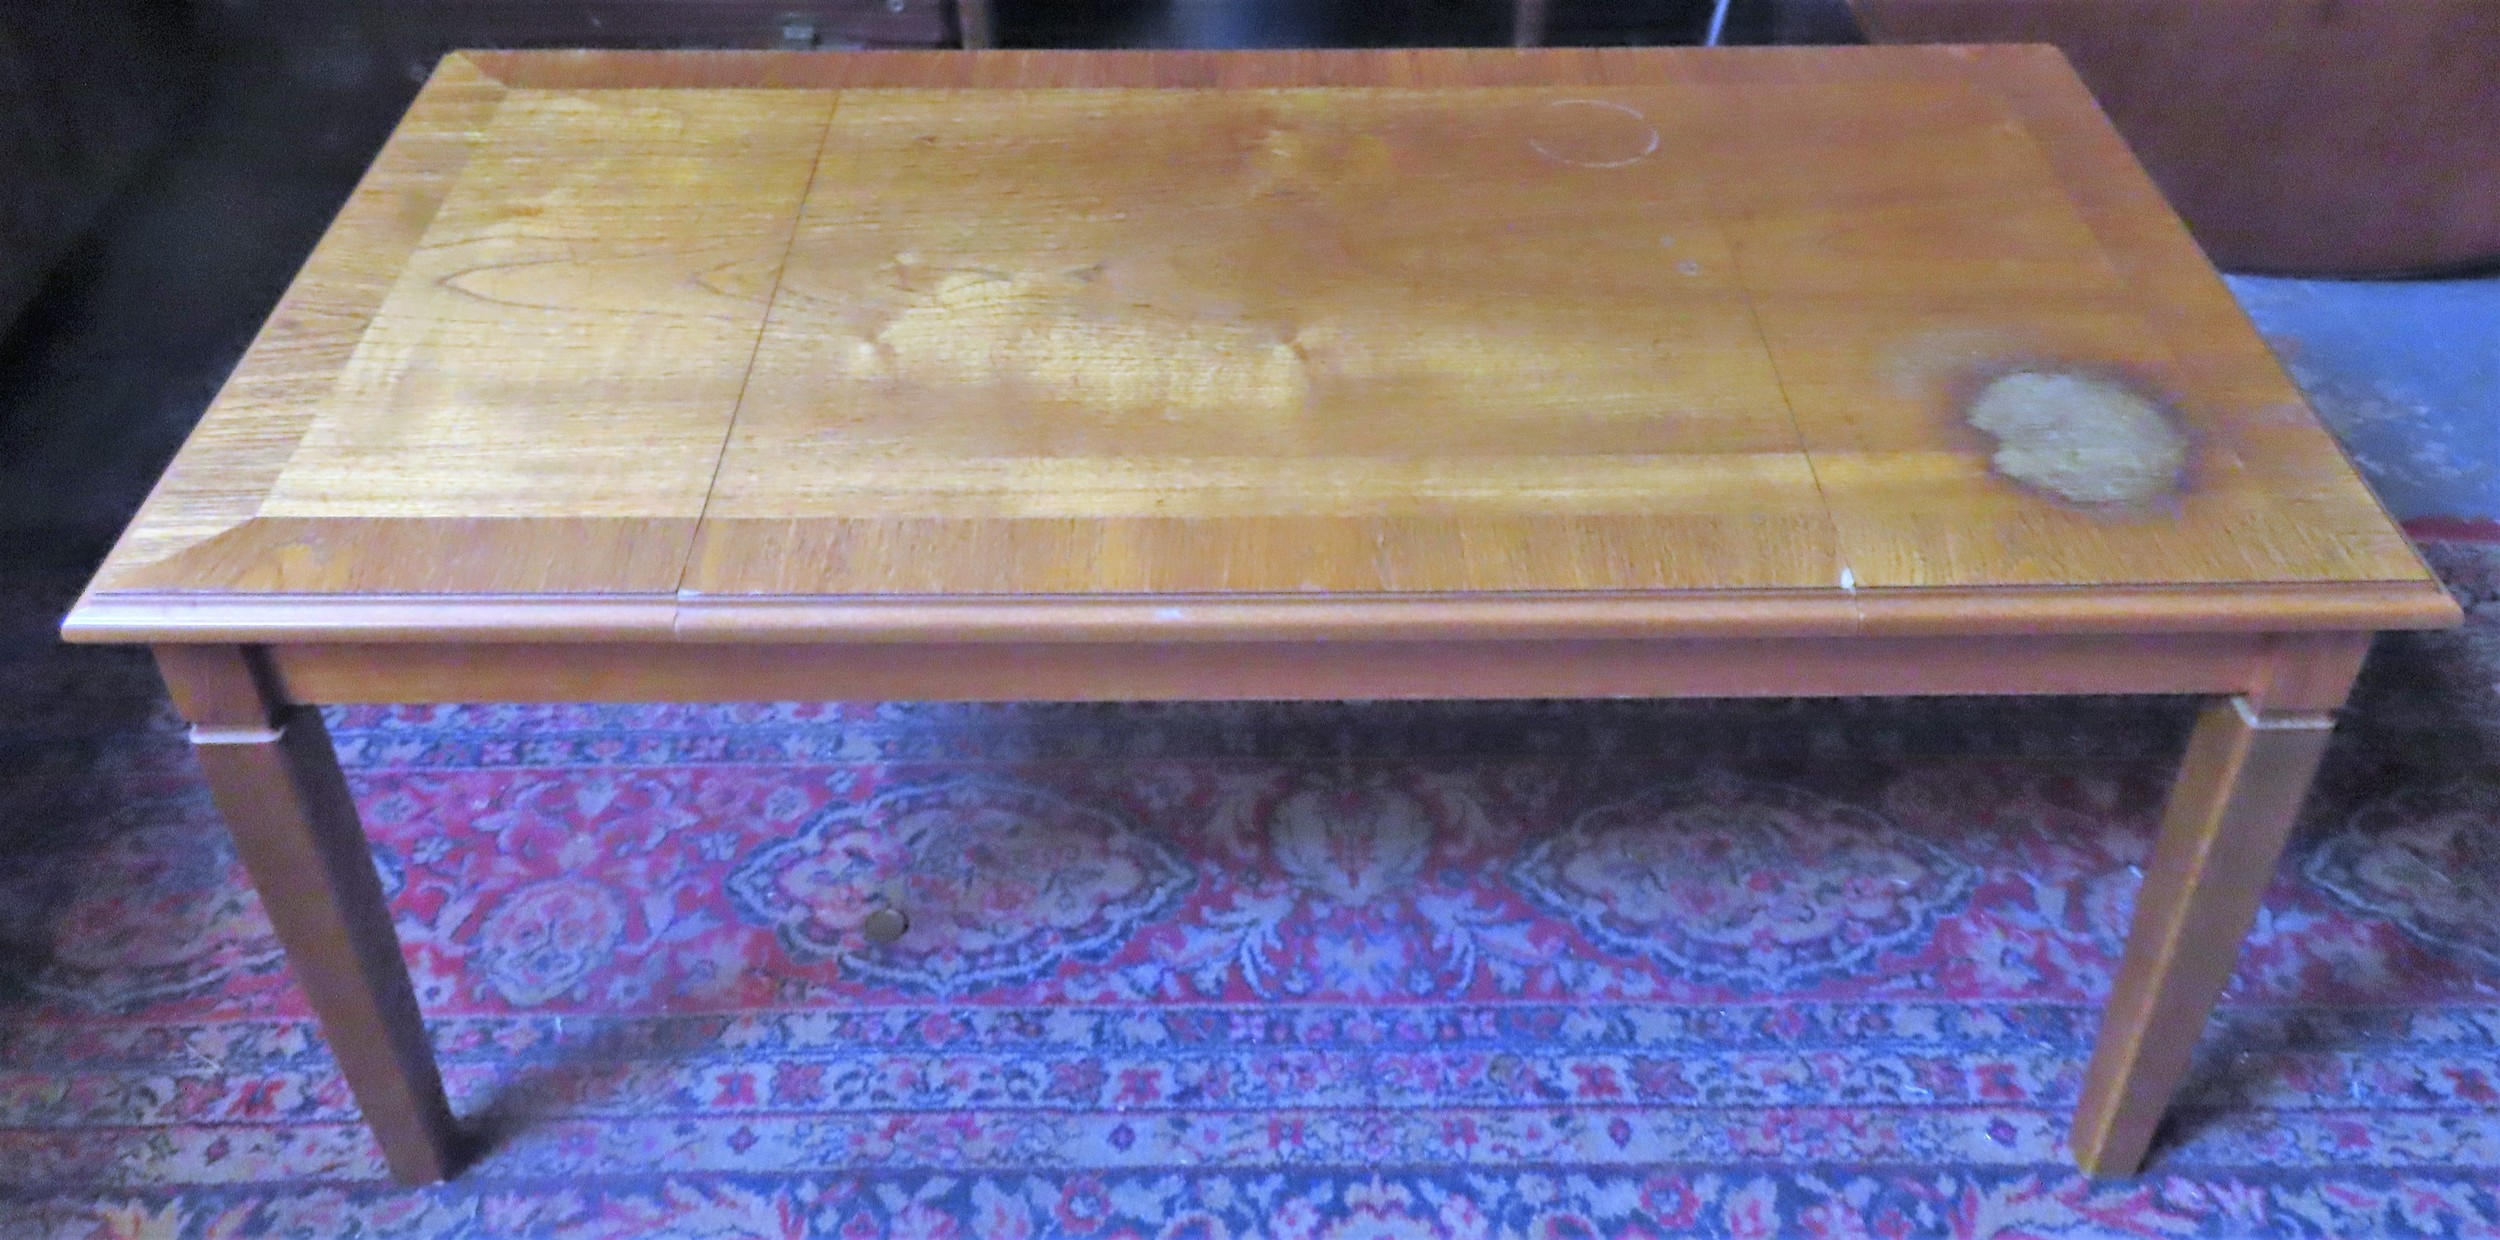 20th century games compendium coffee table. App. 43cm H x 98cm W x 50.5cm D Used condition, scuffs - Image 2 of 2